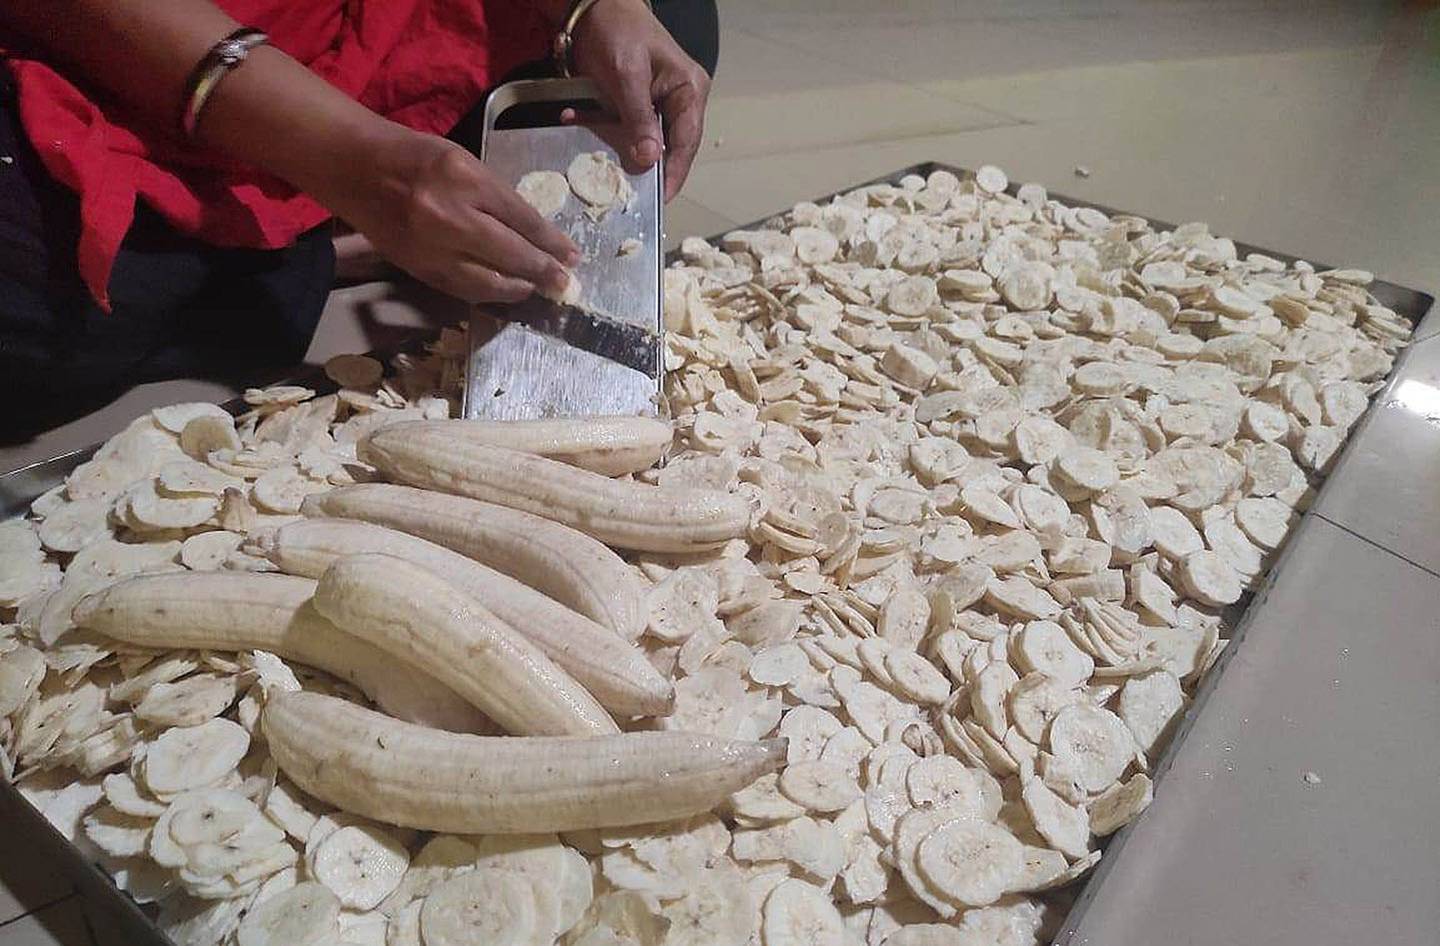 Banana flour mobilises farmers to use excess produce when regular sales and harvests are impacted. Photo: Shree Padre